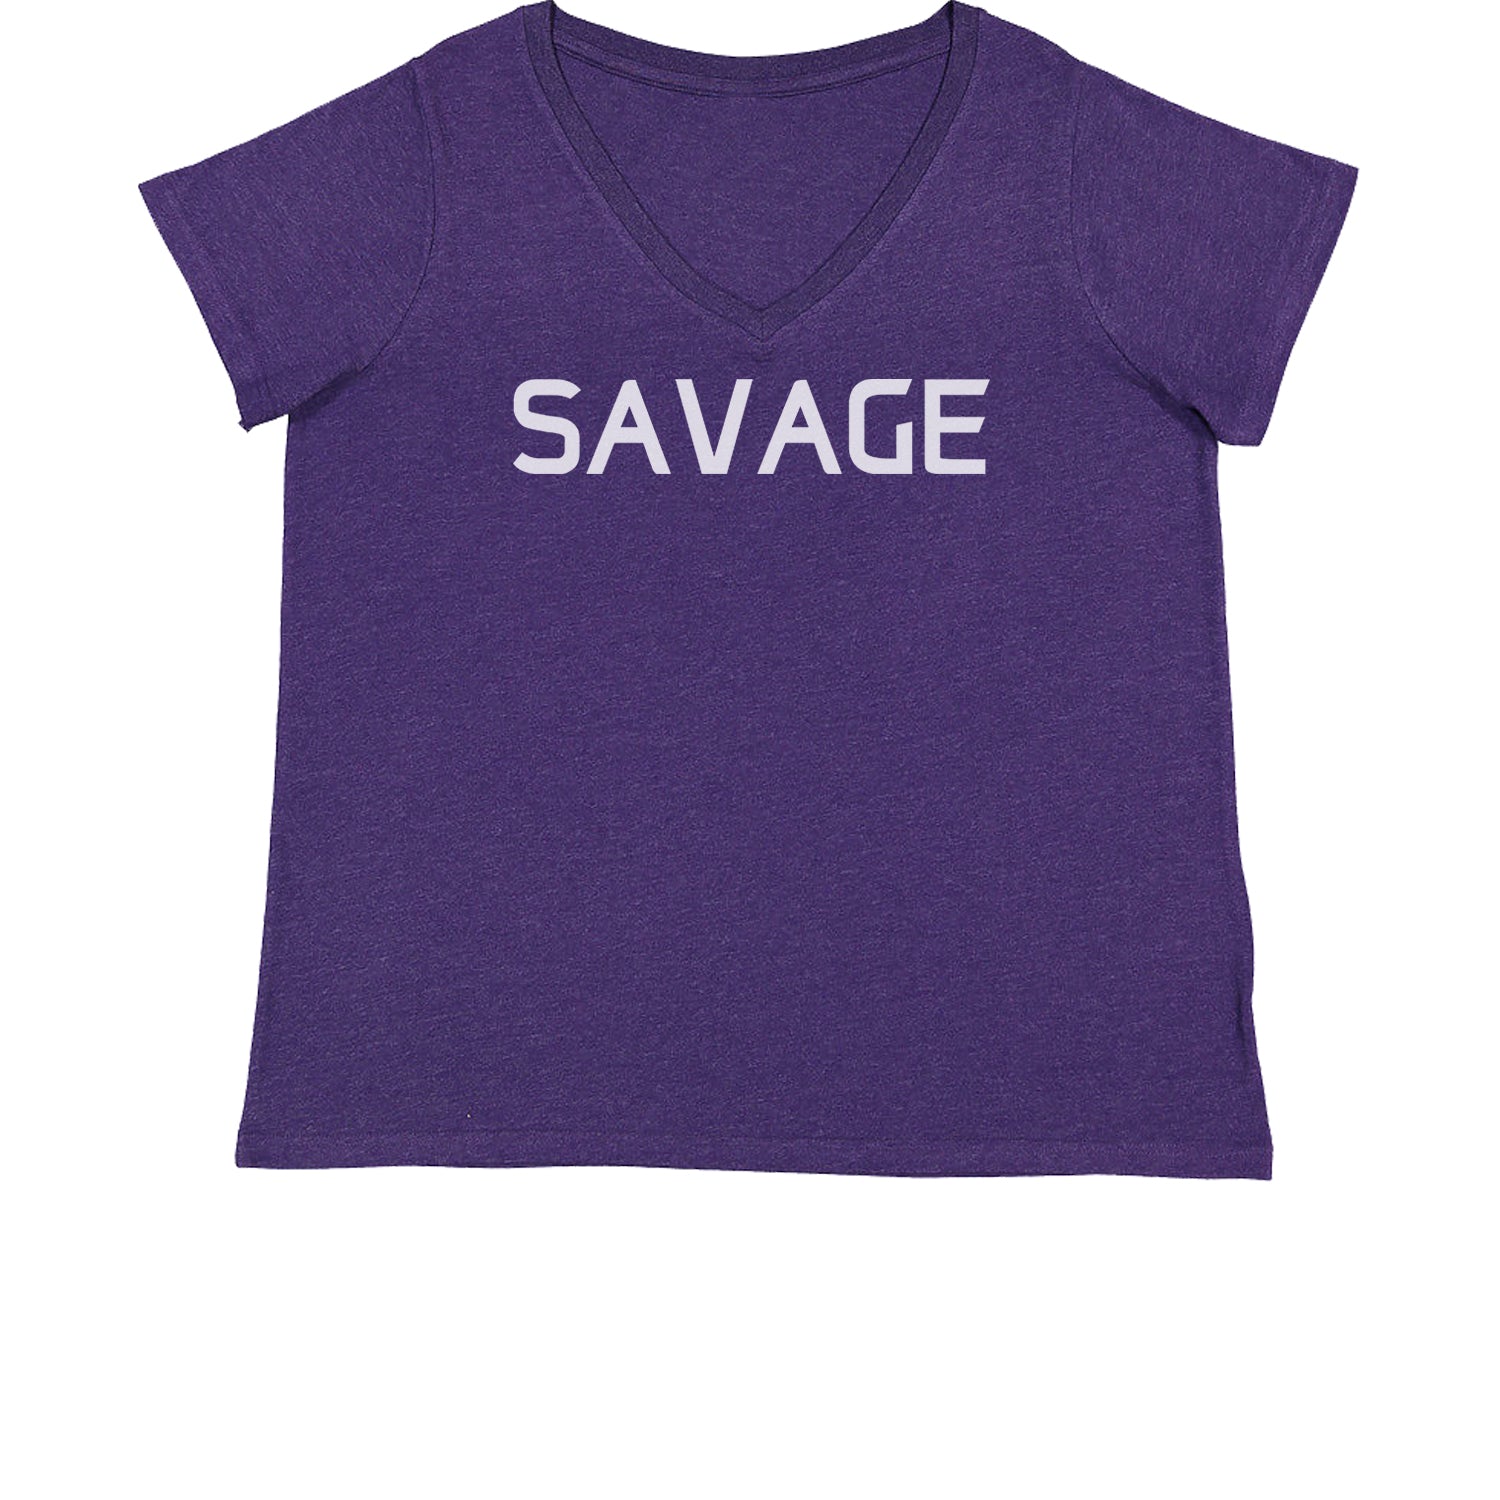 Savage Womens Plus Size V-Neck T-shirt #expressiontees by Expression Tees